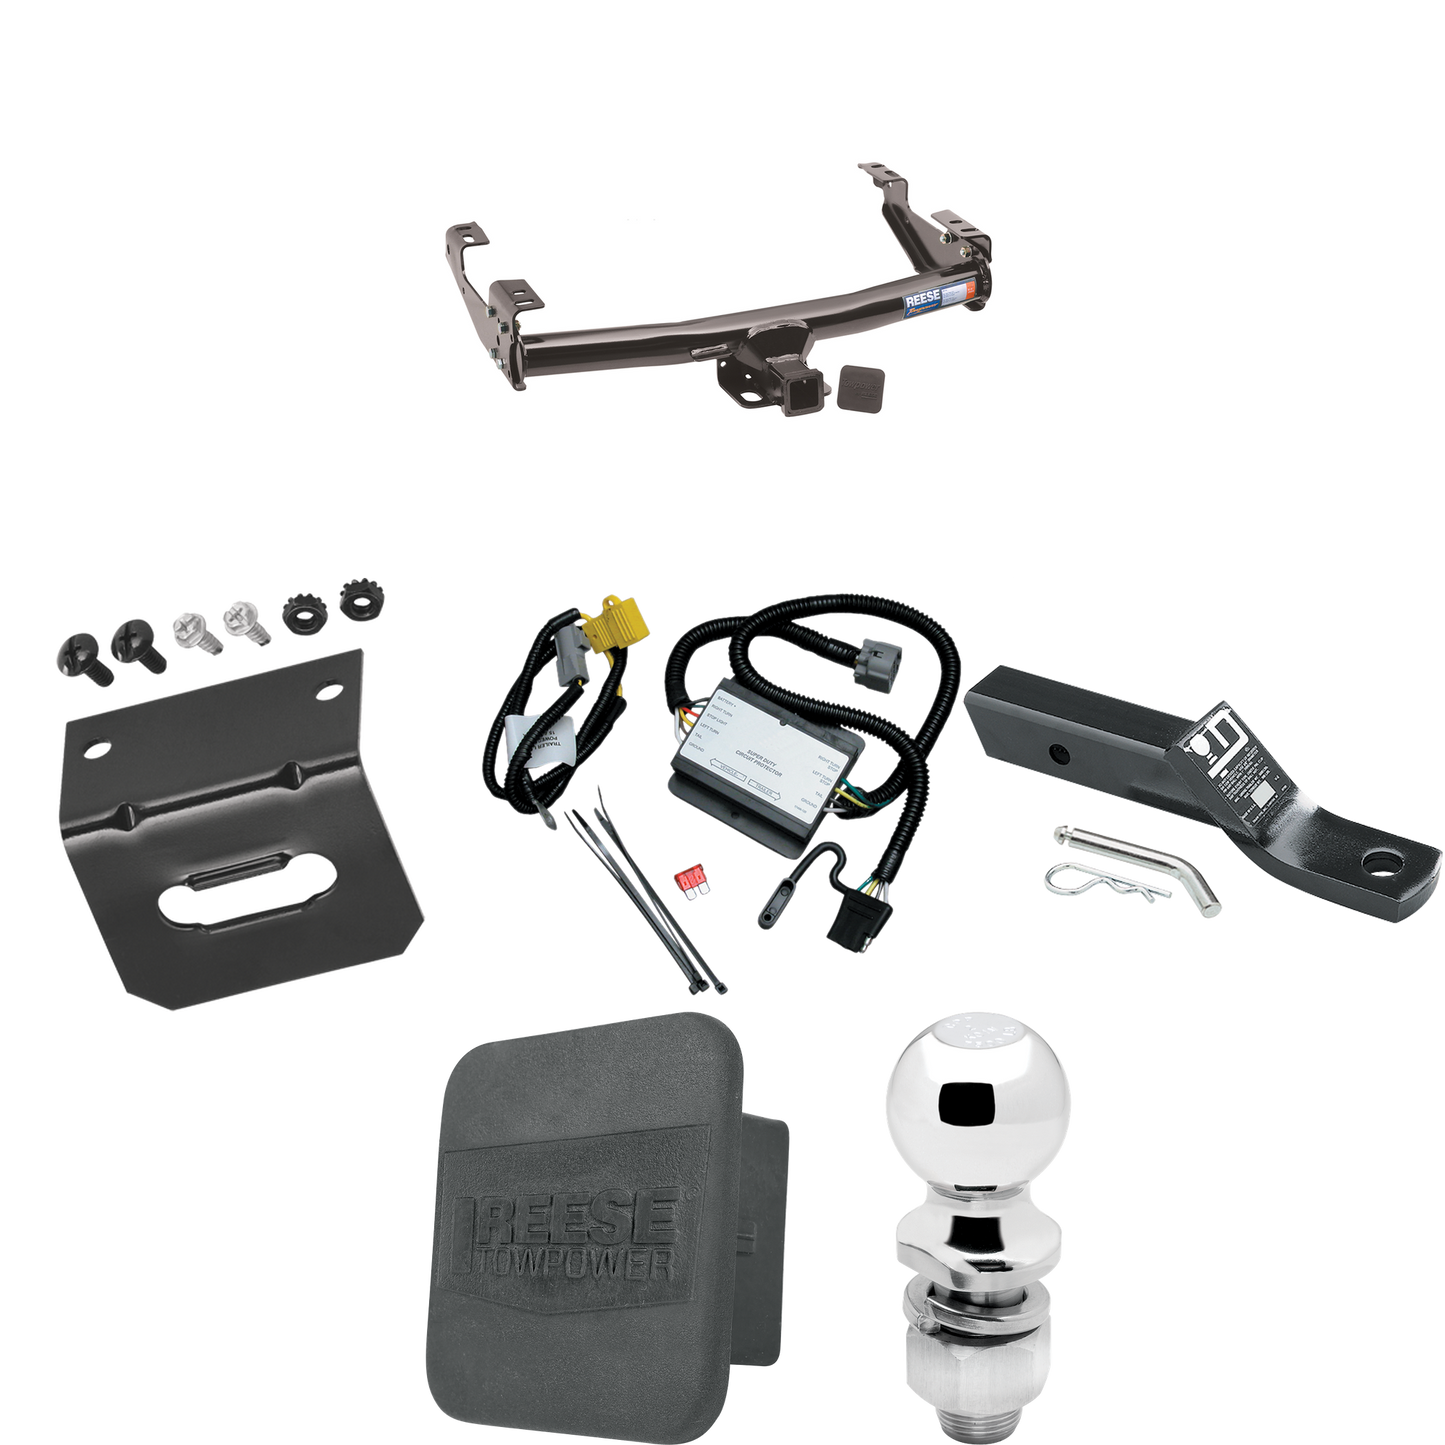 Fits 2000-2000 Toyota Tundra Trailer Hitch Tow PKG w/ 4-Flat Wiring + Ball Mount w/ 2" Drop & 2" Ball + Wiring Bracket + Hitch Cover By Reese Towpower